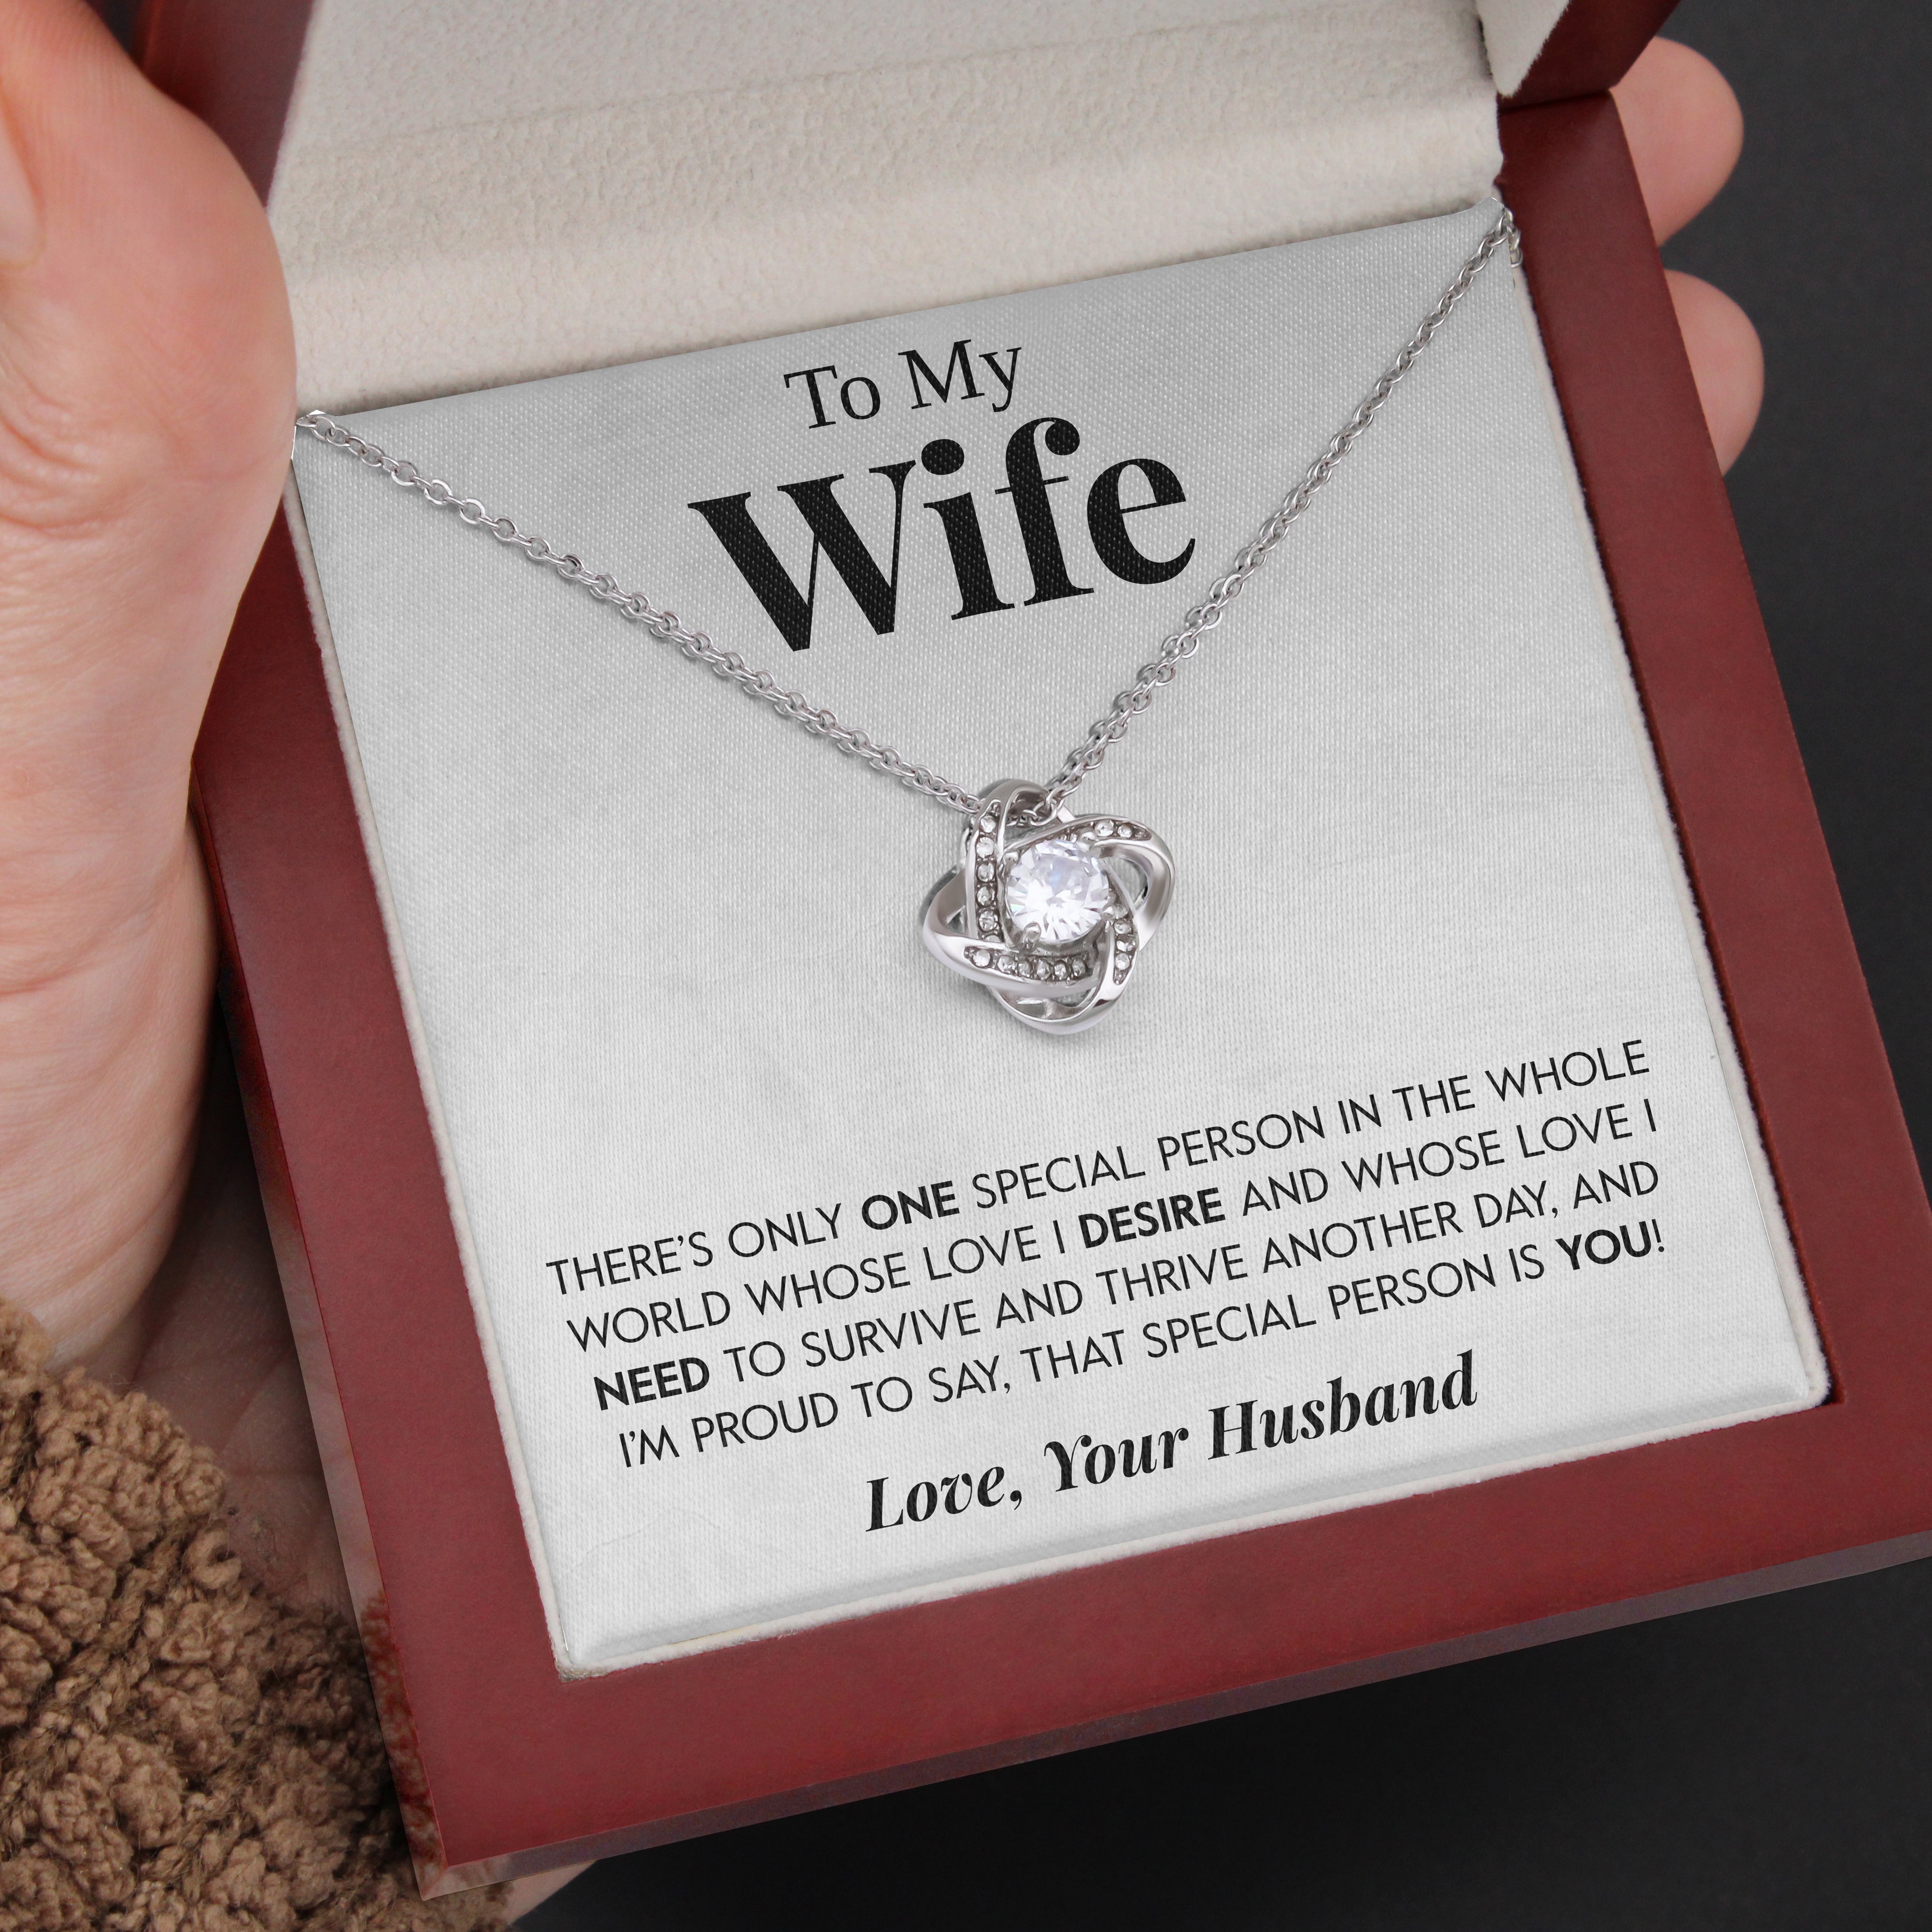 To My Wife | "Special Person" | Love Knot Necklace